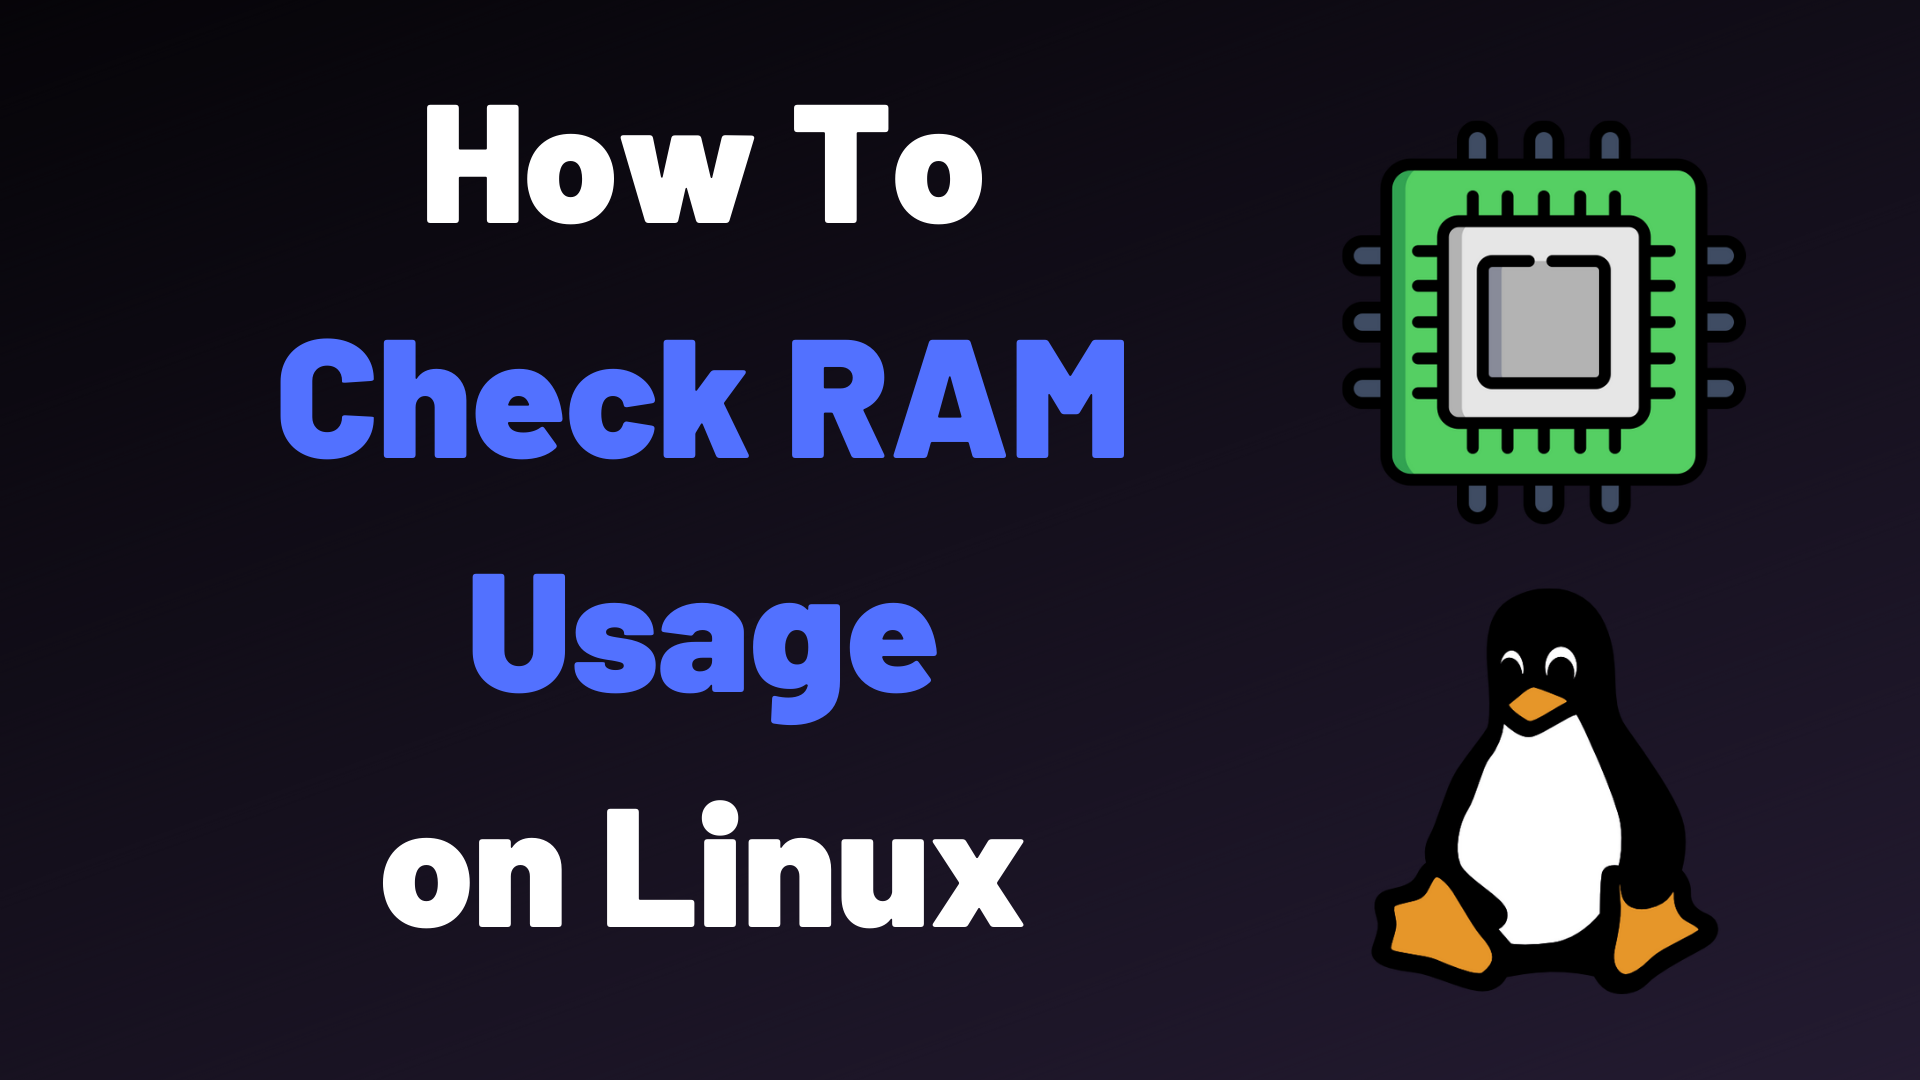 How To Check RAM on Linux